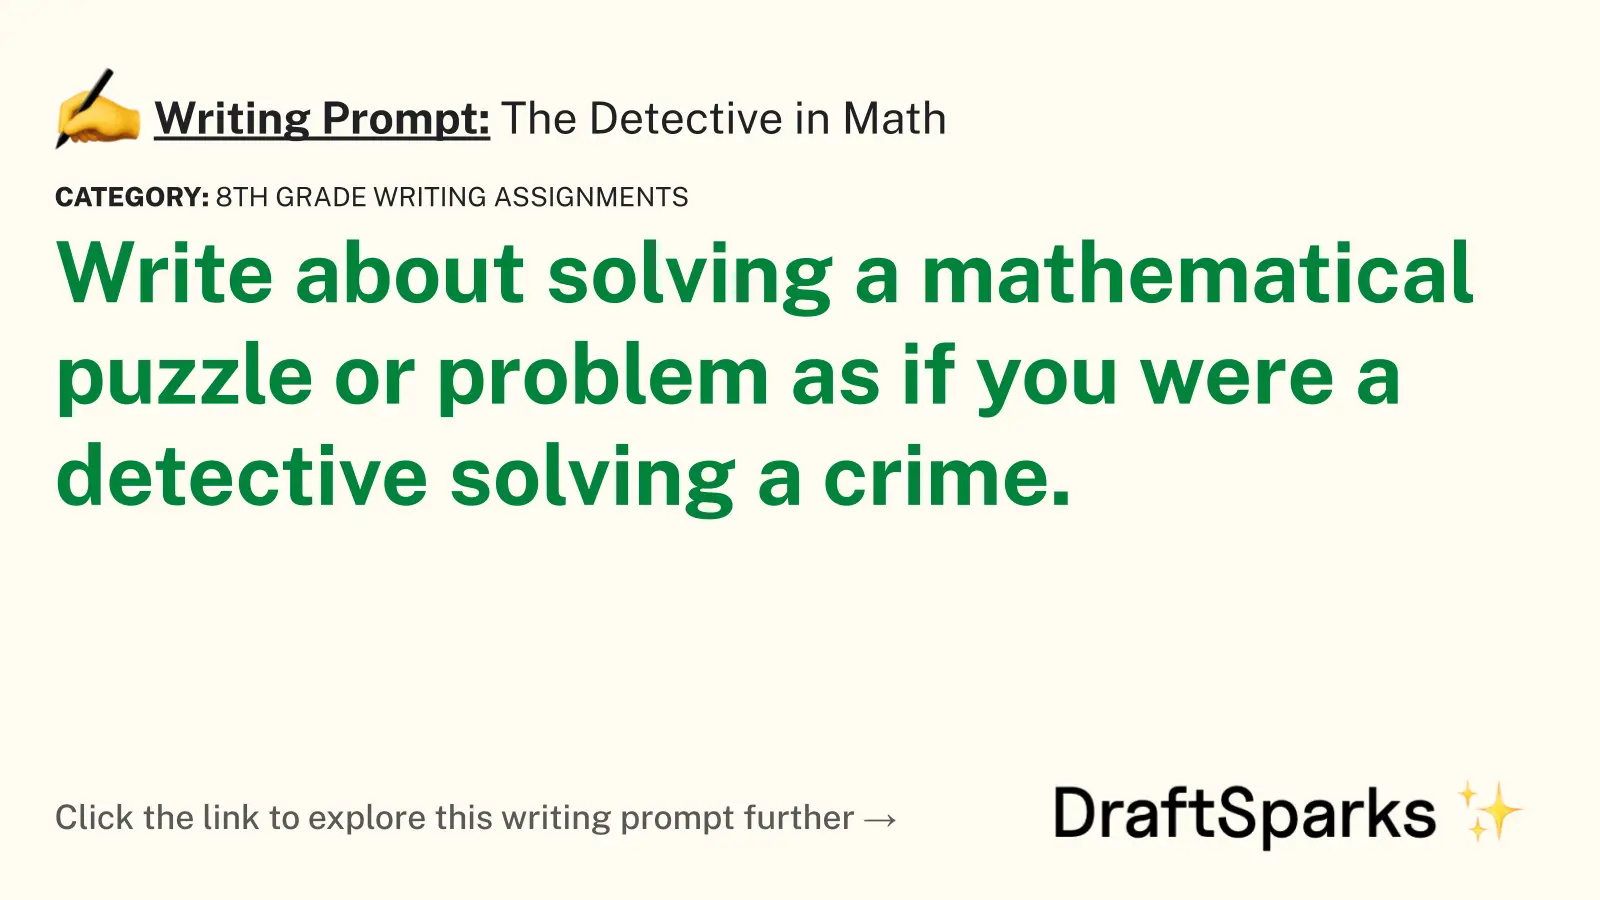 The Detective in Math